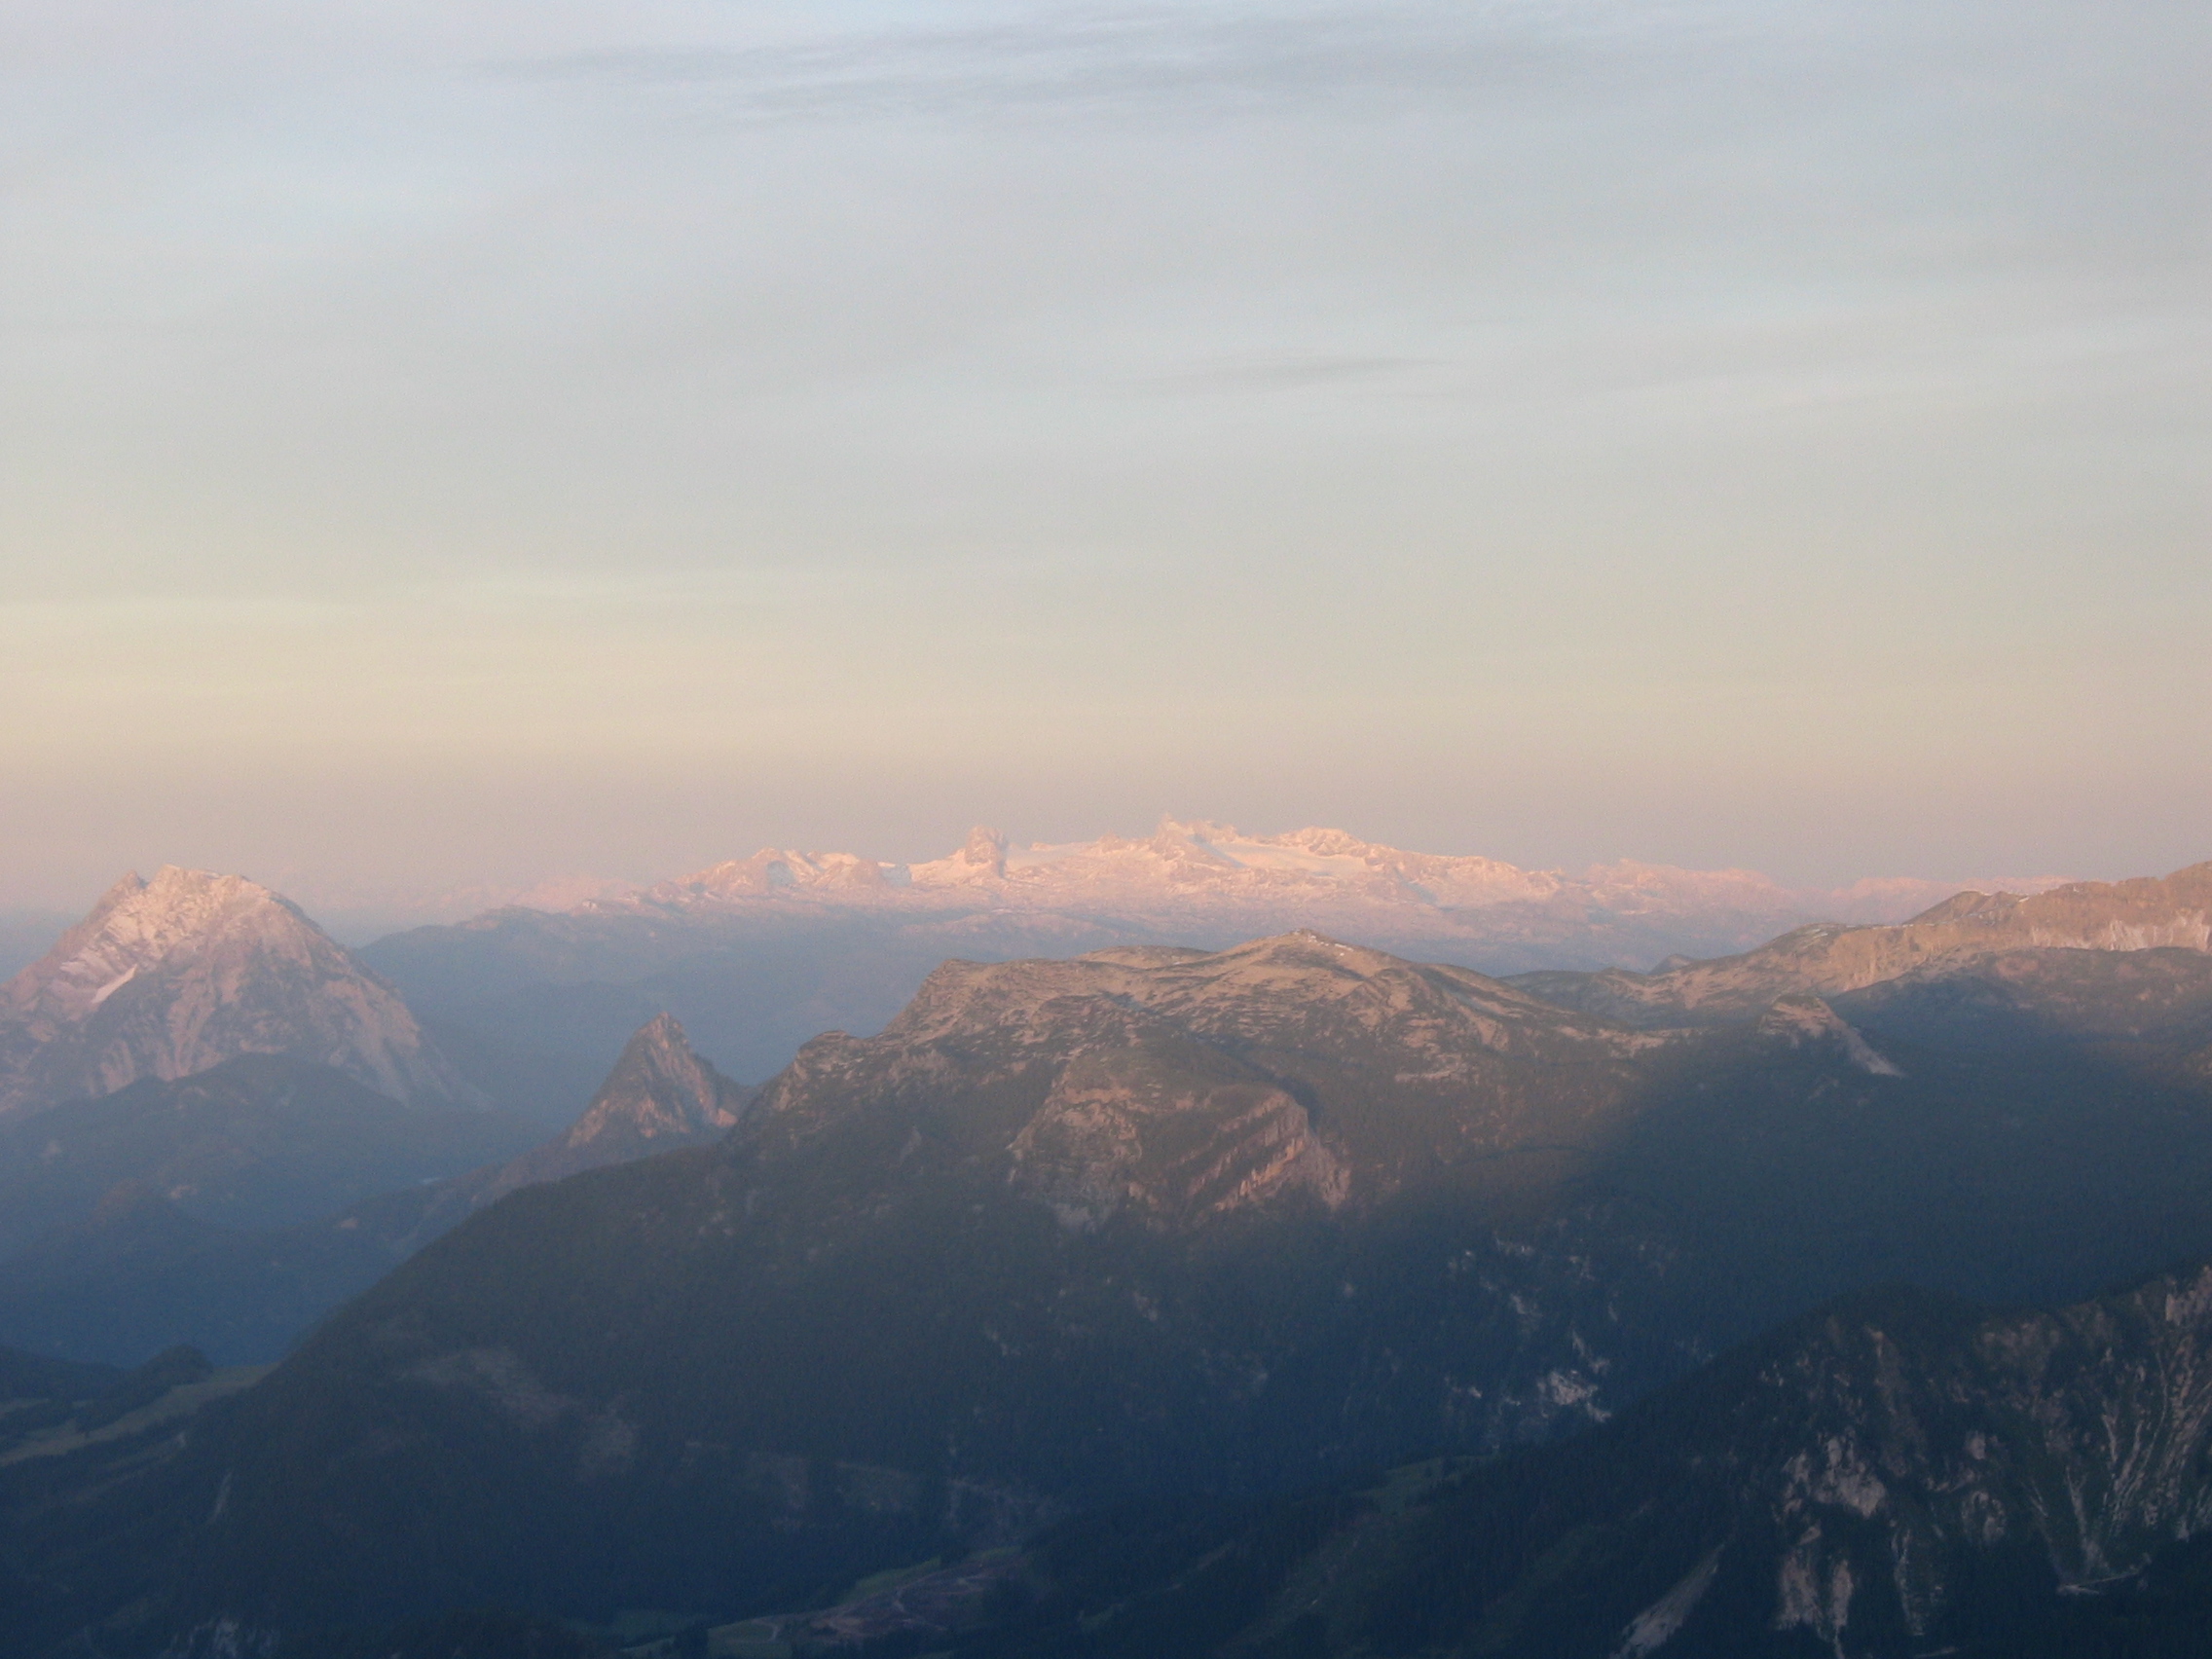 Grimming and Dachstein